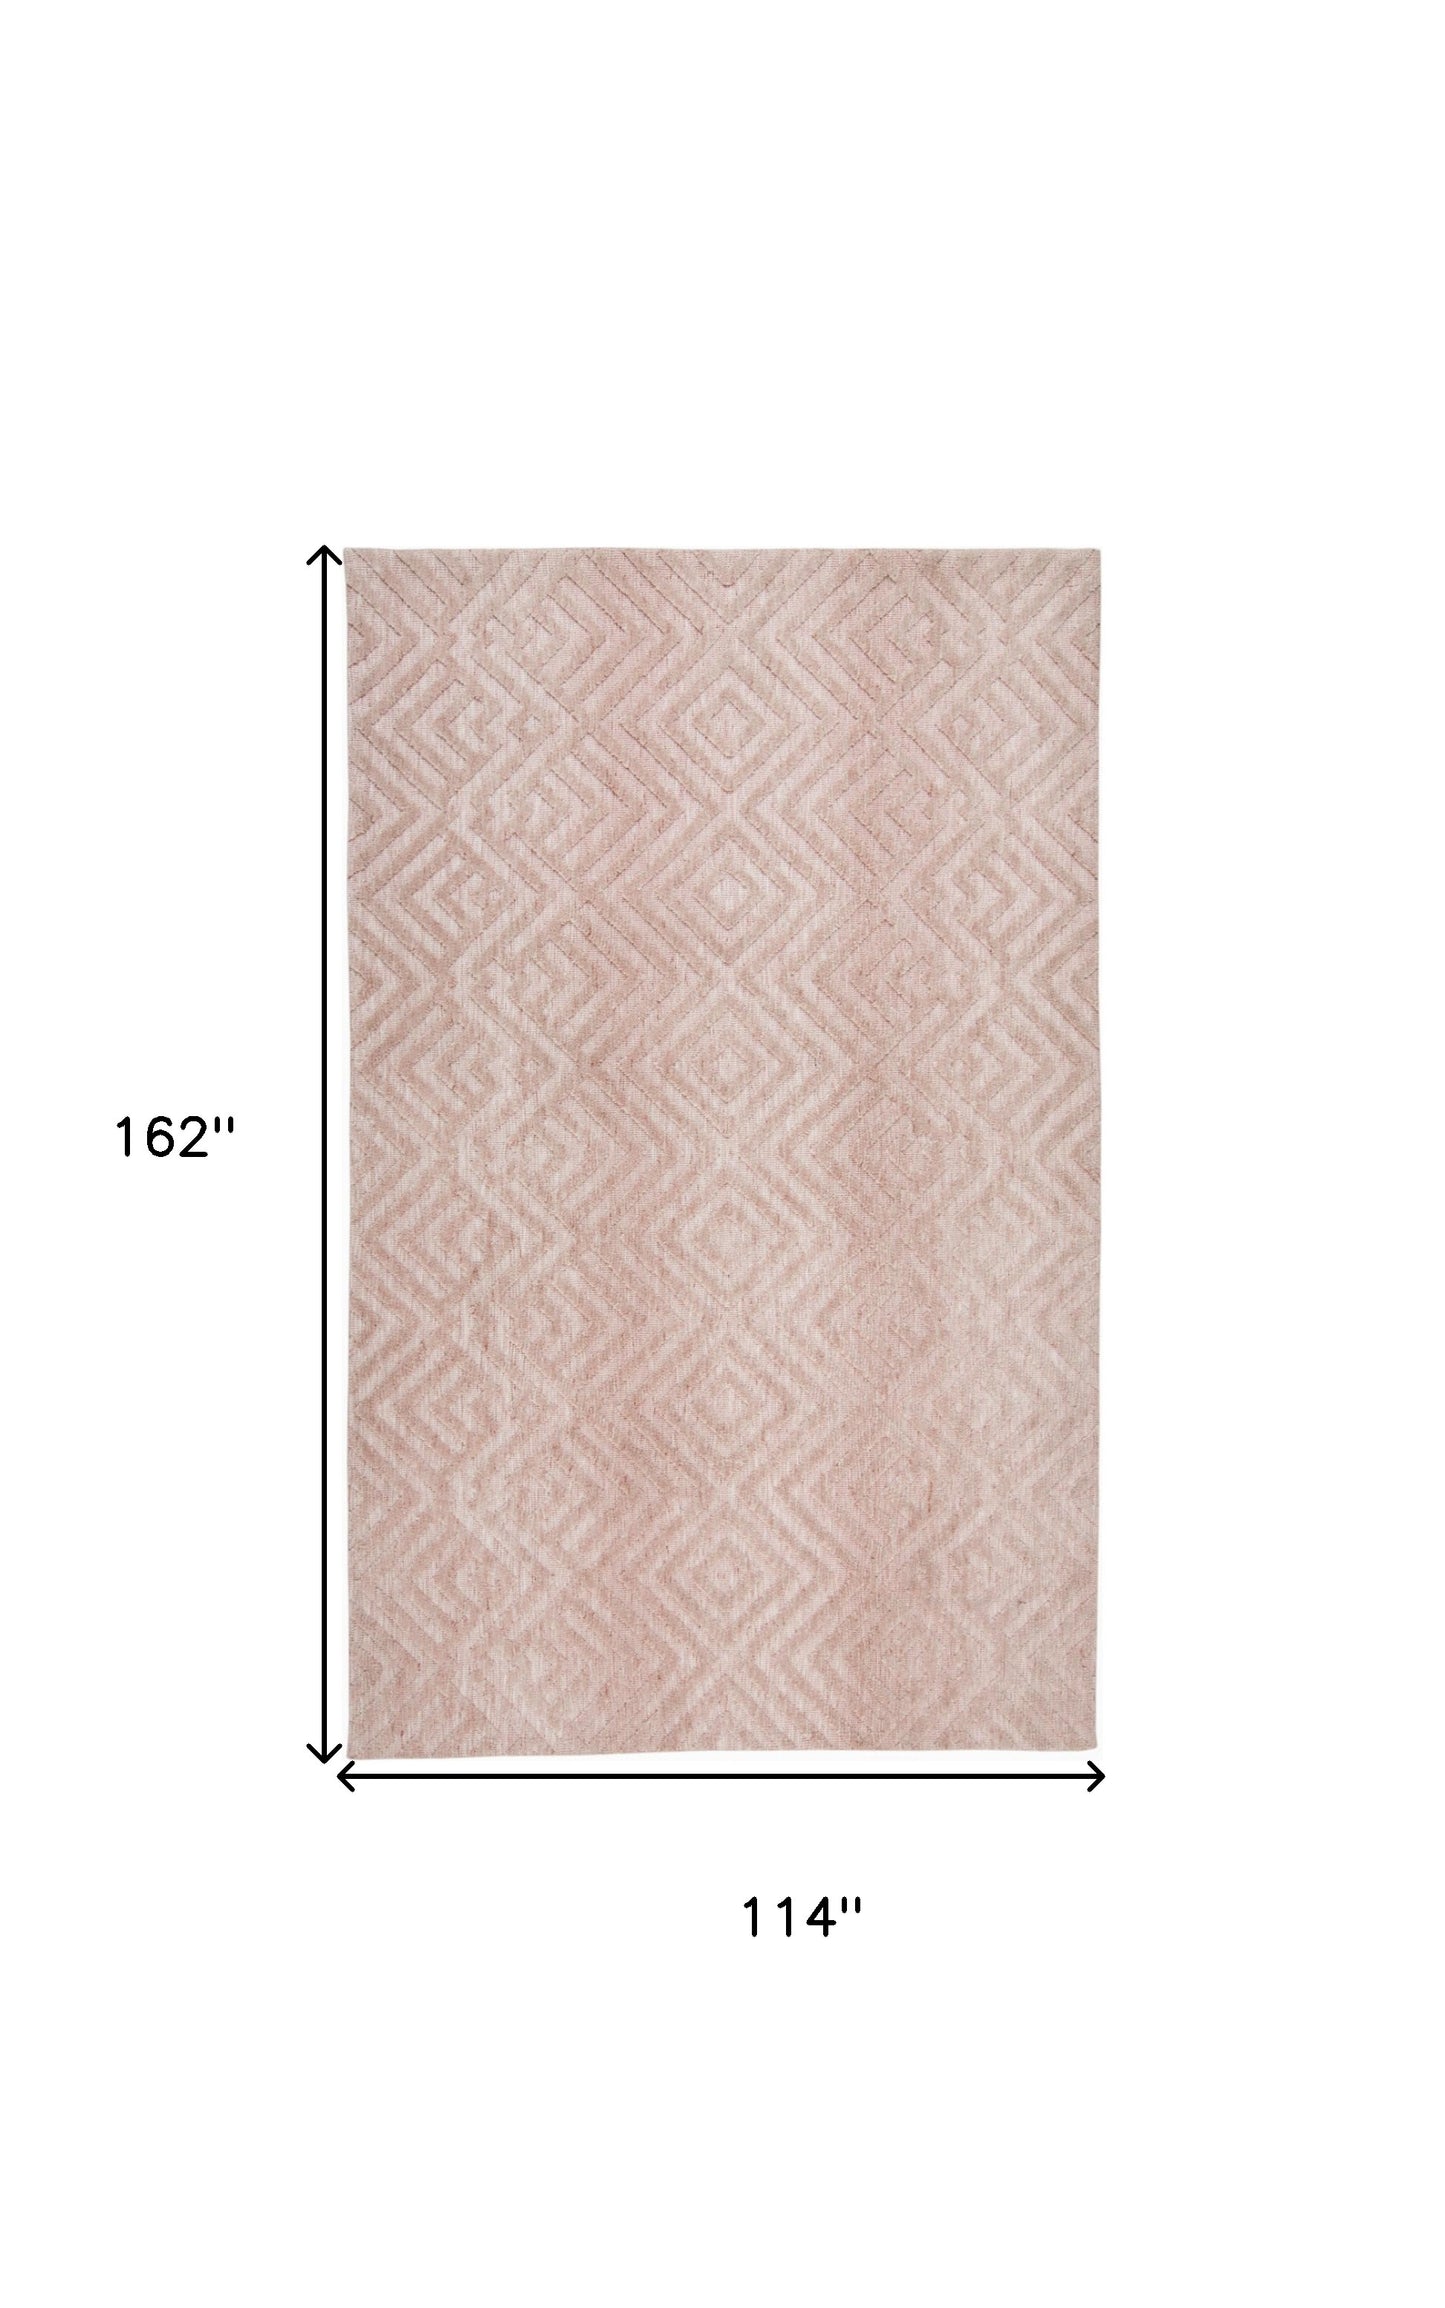 8' X 10' Pink And Ivory Geometric Stain Resistant Area Rug